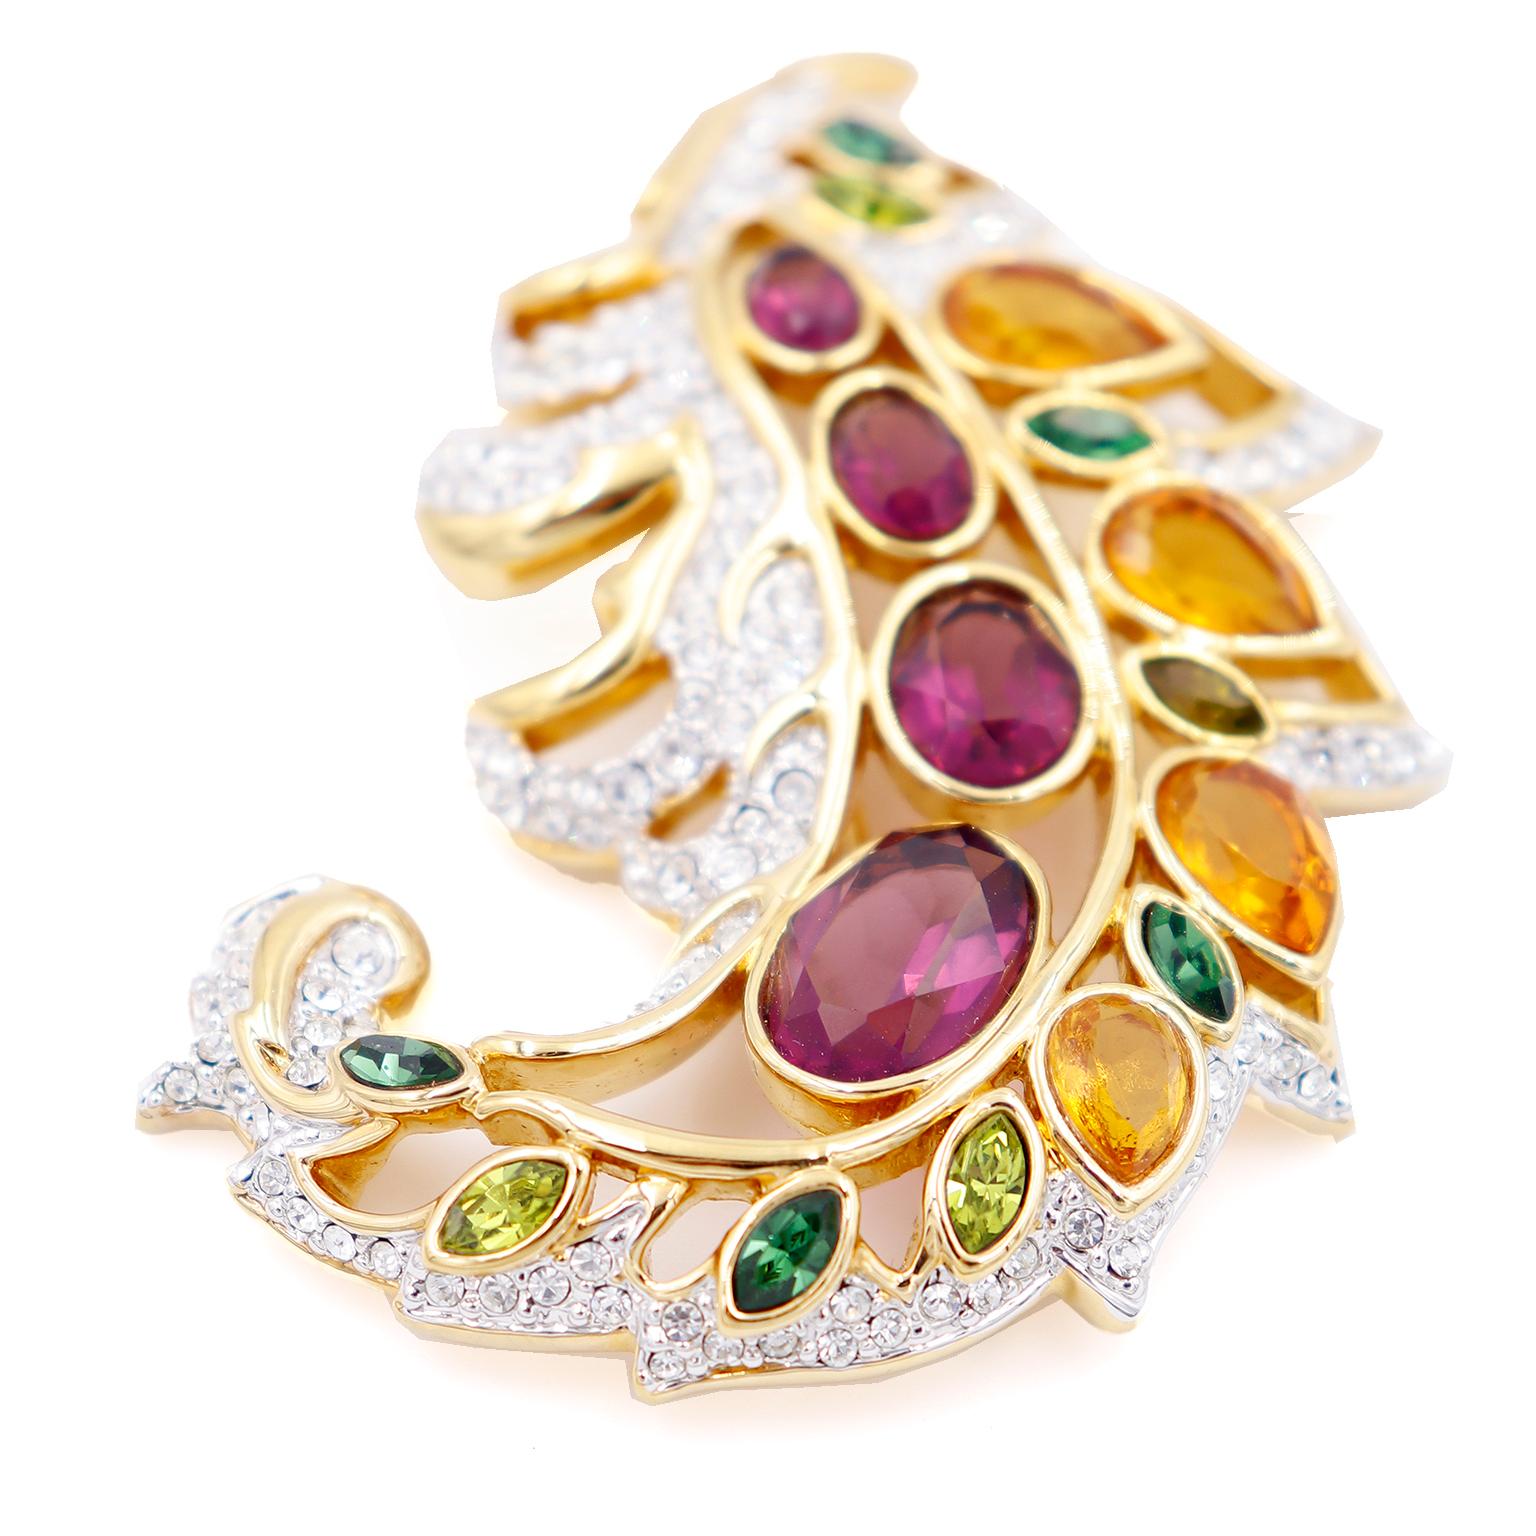 Swarovski Crystal Vintage Signed Gold Brooch With Multi Colored Stones In Excellent Condition For Sale In Portland, OR